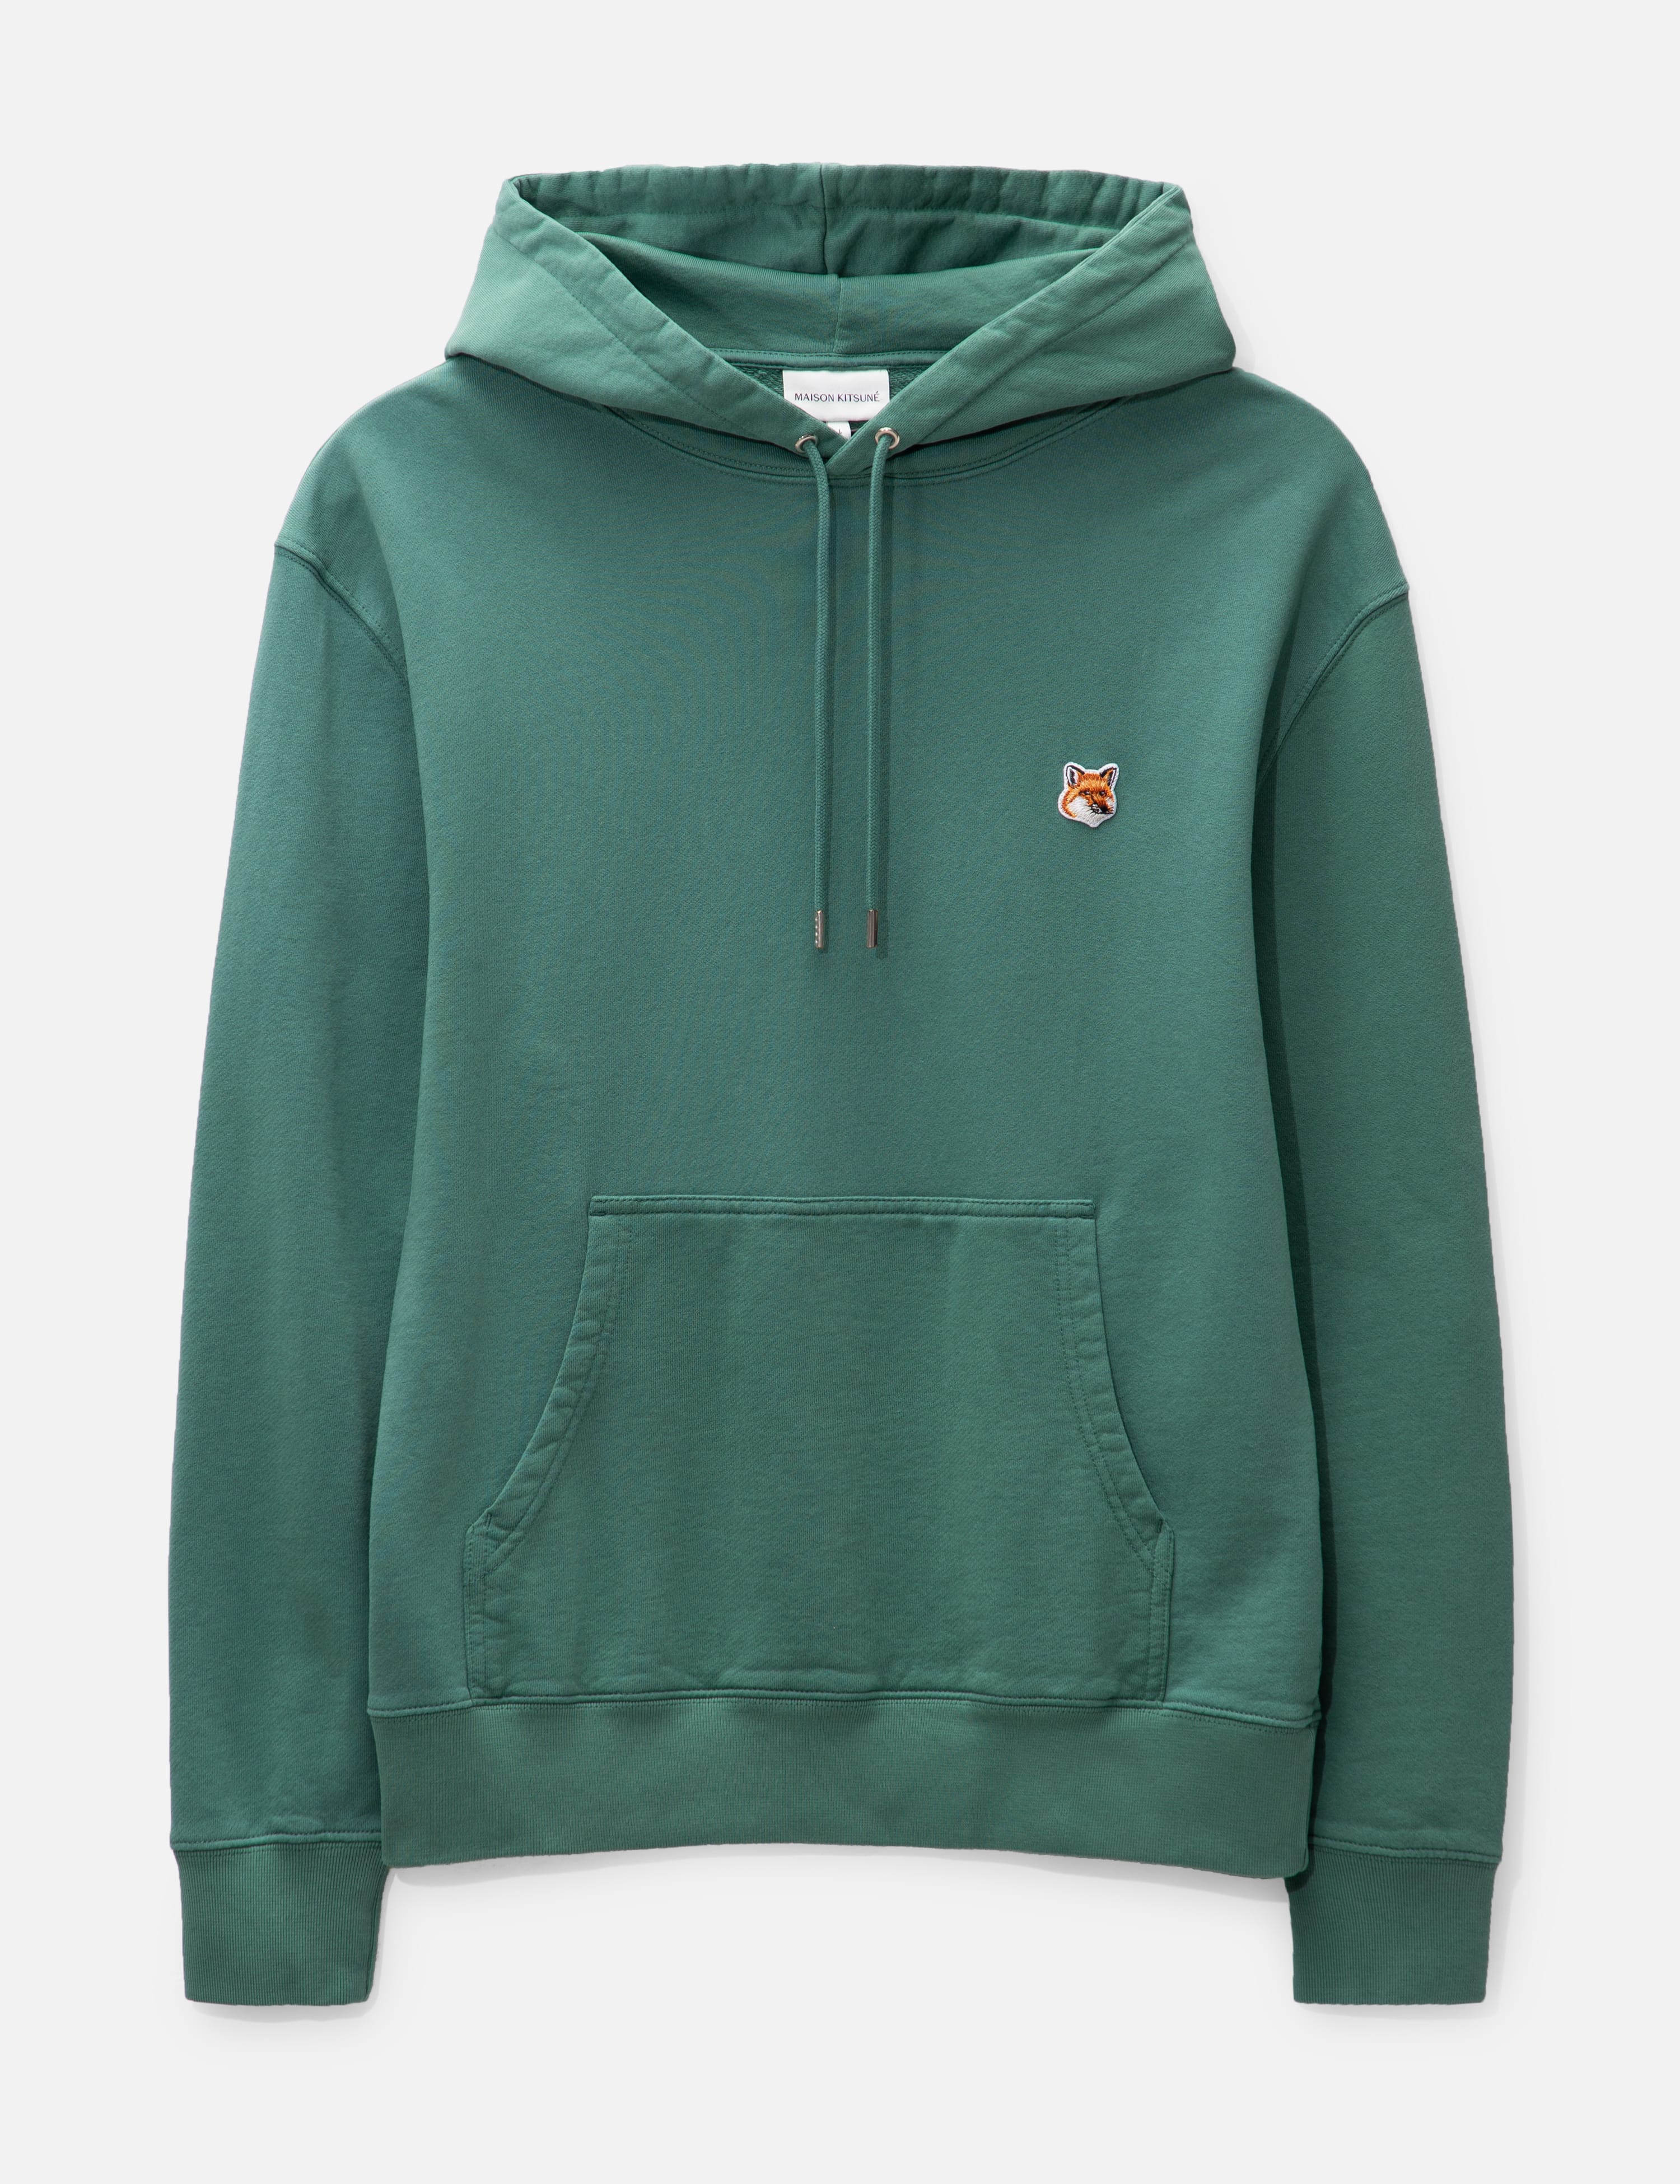 Mr. Completely - Kate Forever Hoodie Left | HBX - Globally Curated